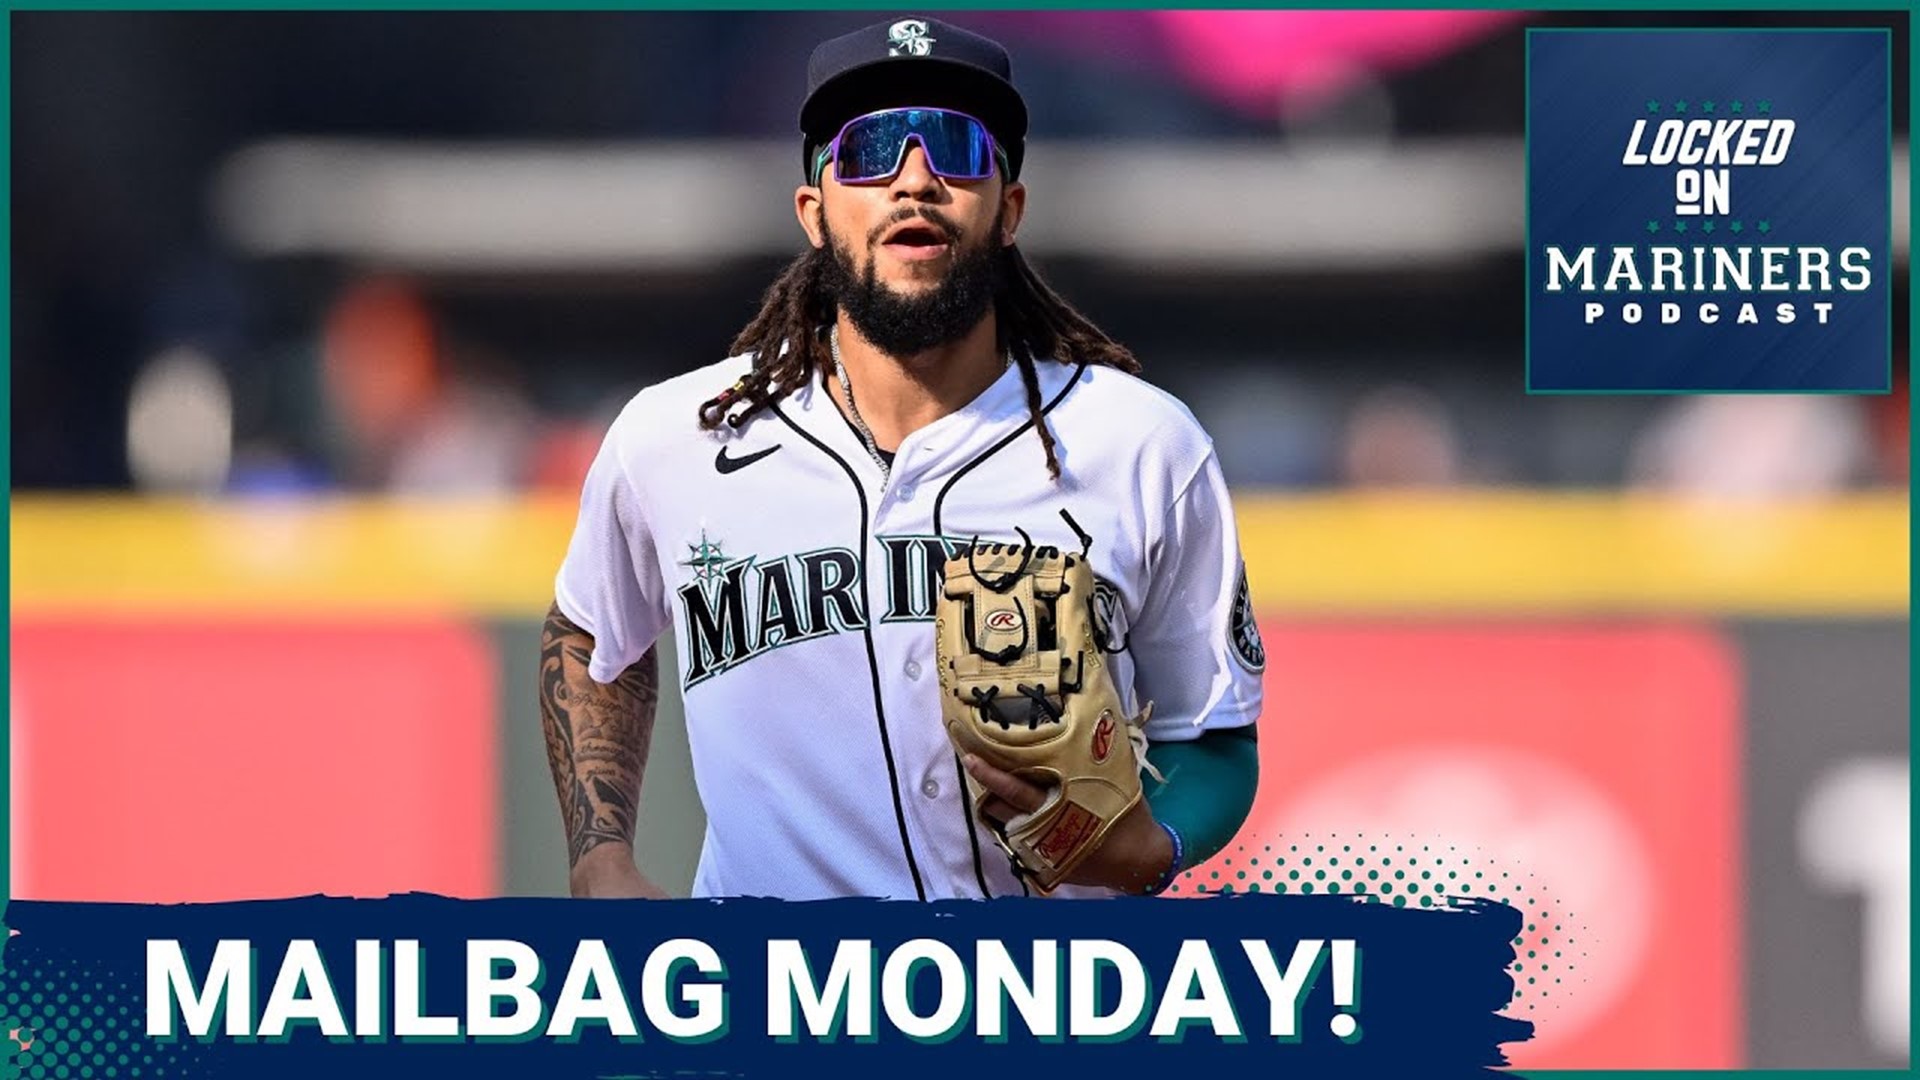 On today's show, we discuss the possibility of Julio Rodriguez winning MVP in 2023, whether the team should prioritize Mitch Haniger or Jesse Winker, and more.